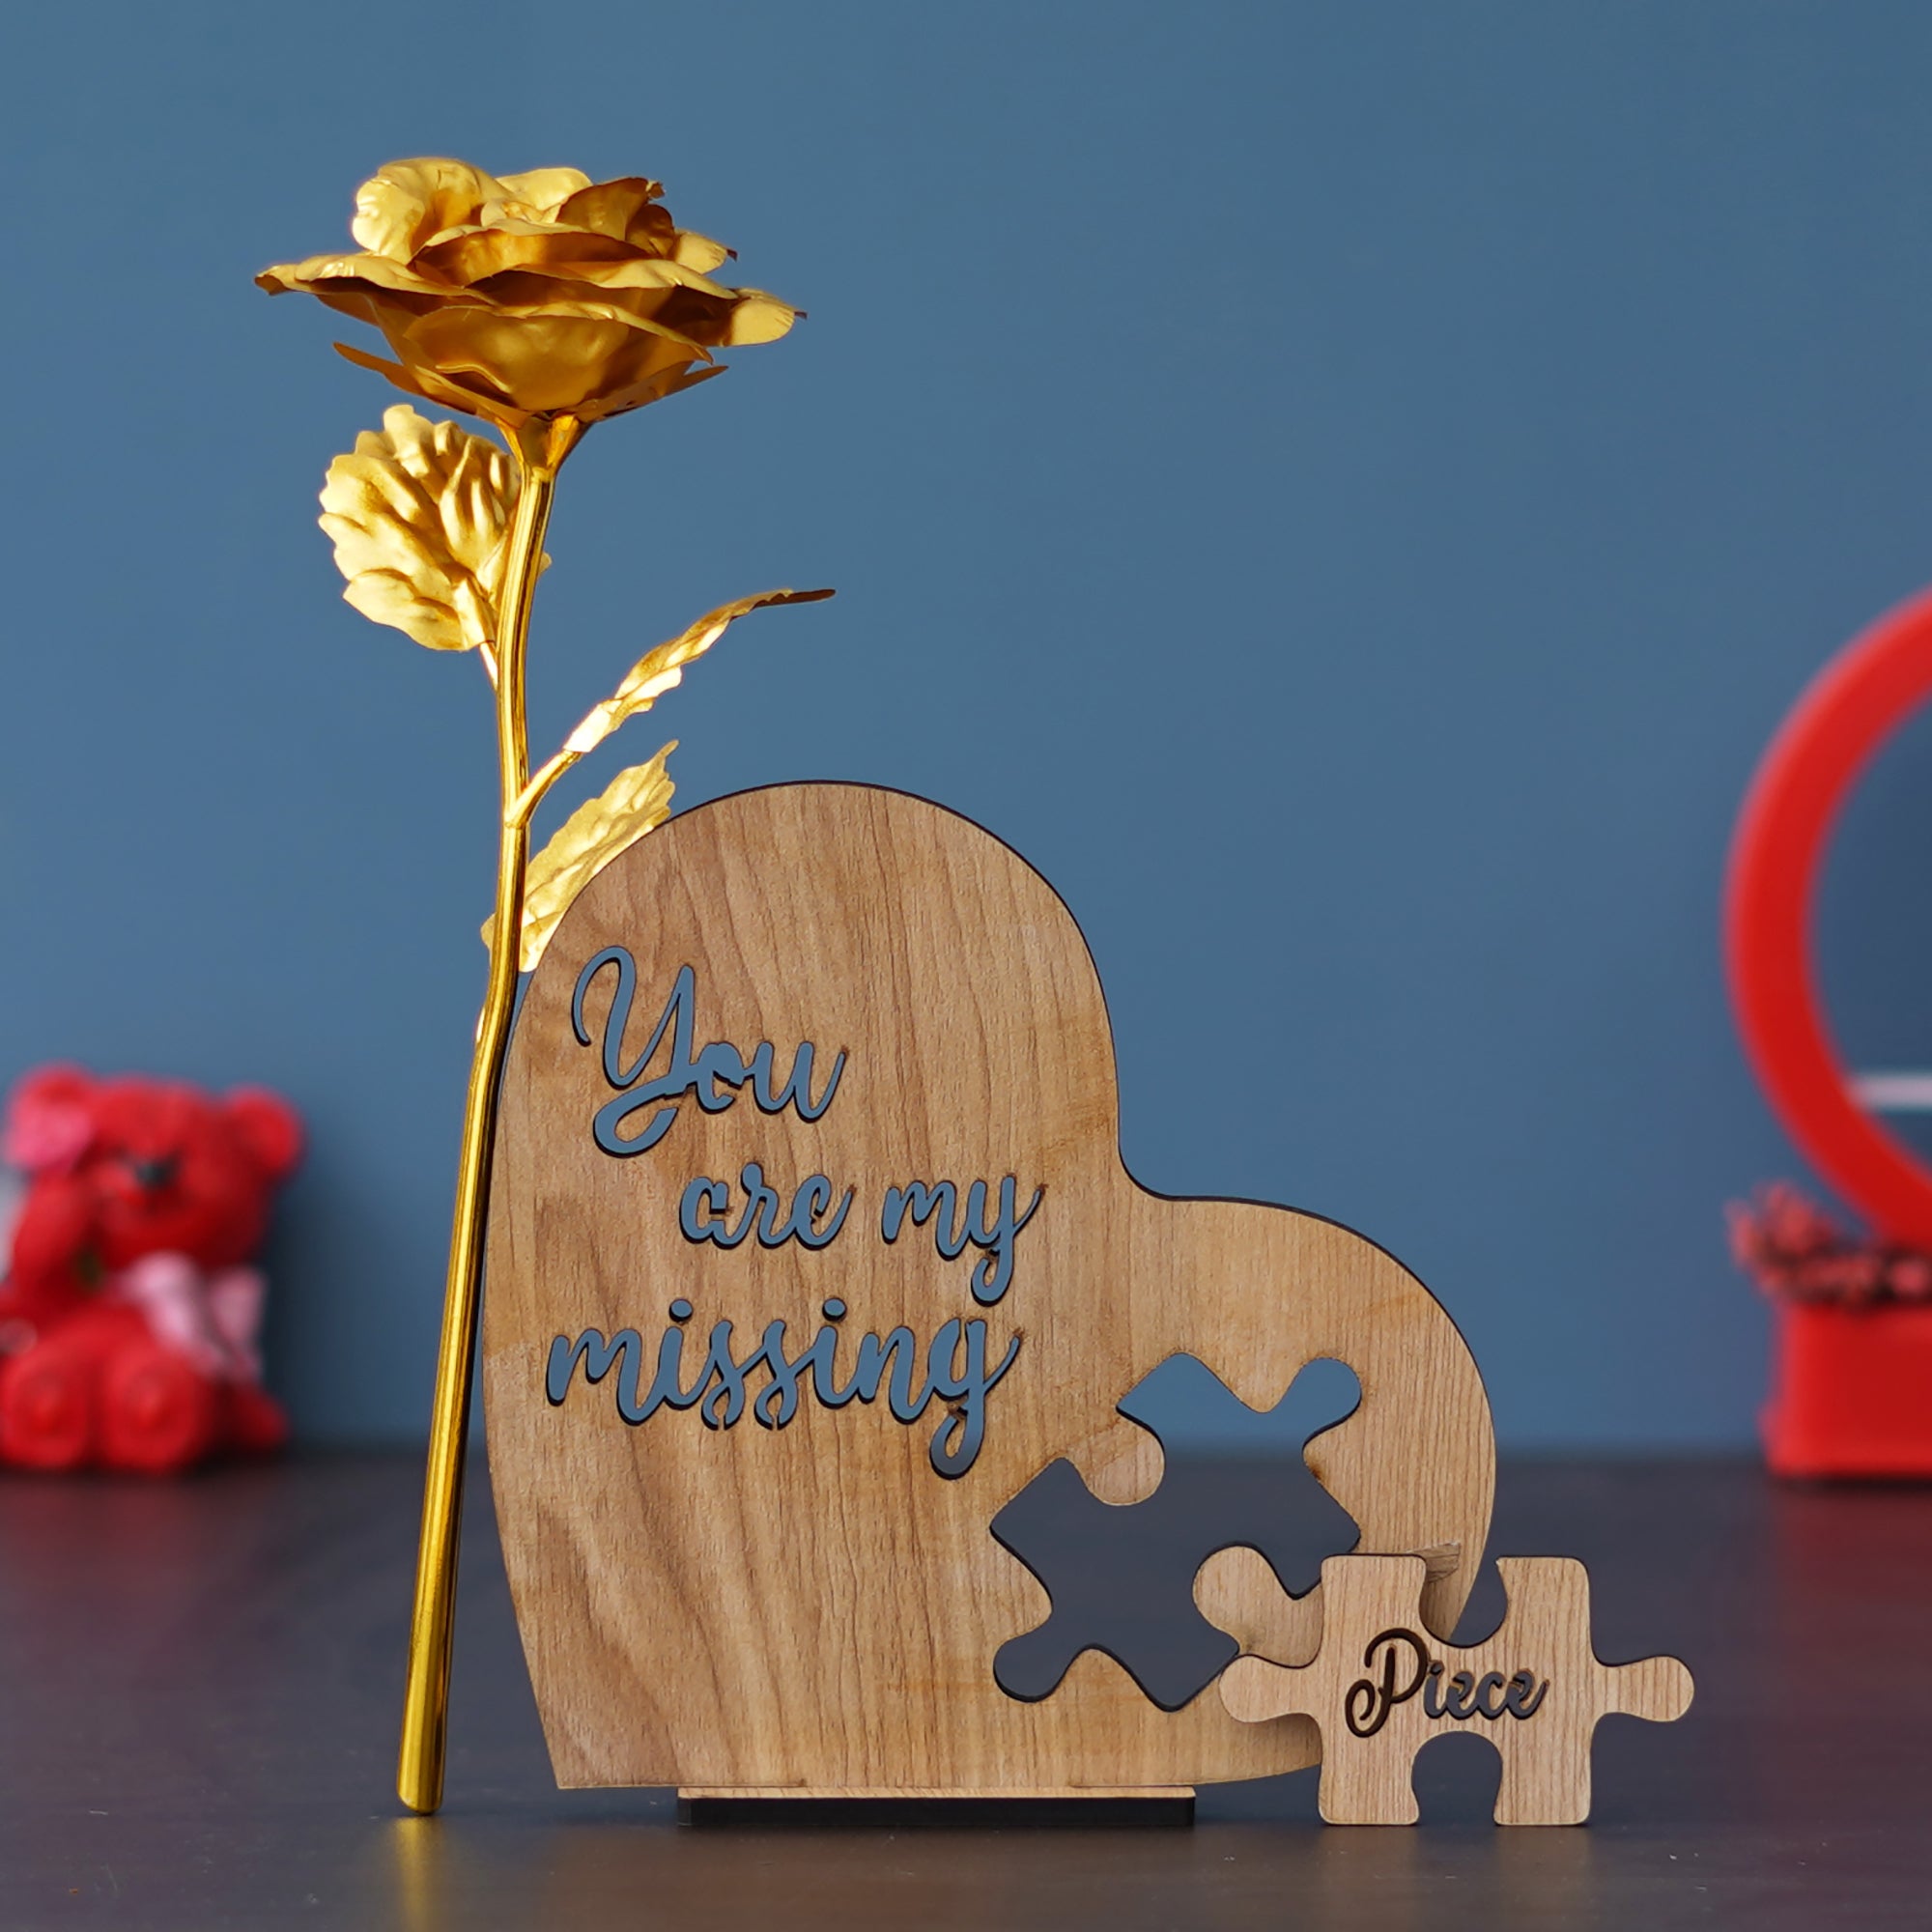 Valentine Combo of Golden Rose Gift Set, "You are my missing piece" Wooden Puzzle Brown Showpiece With Stand